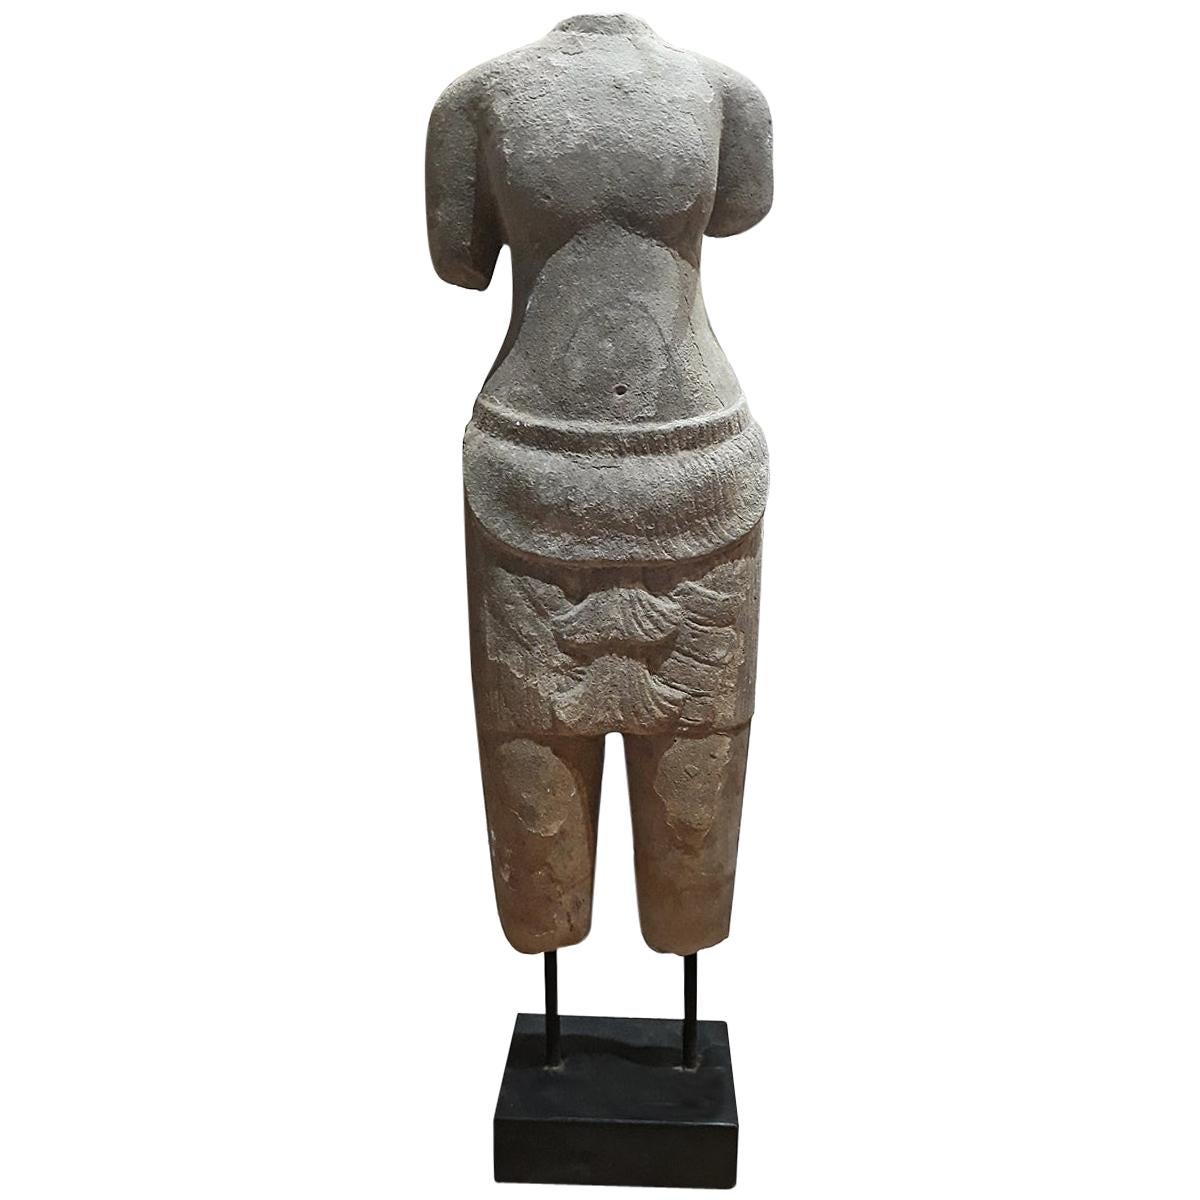 Hand Carved Sandstone Tabletop Sculpture of a Woman, from Thailand